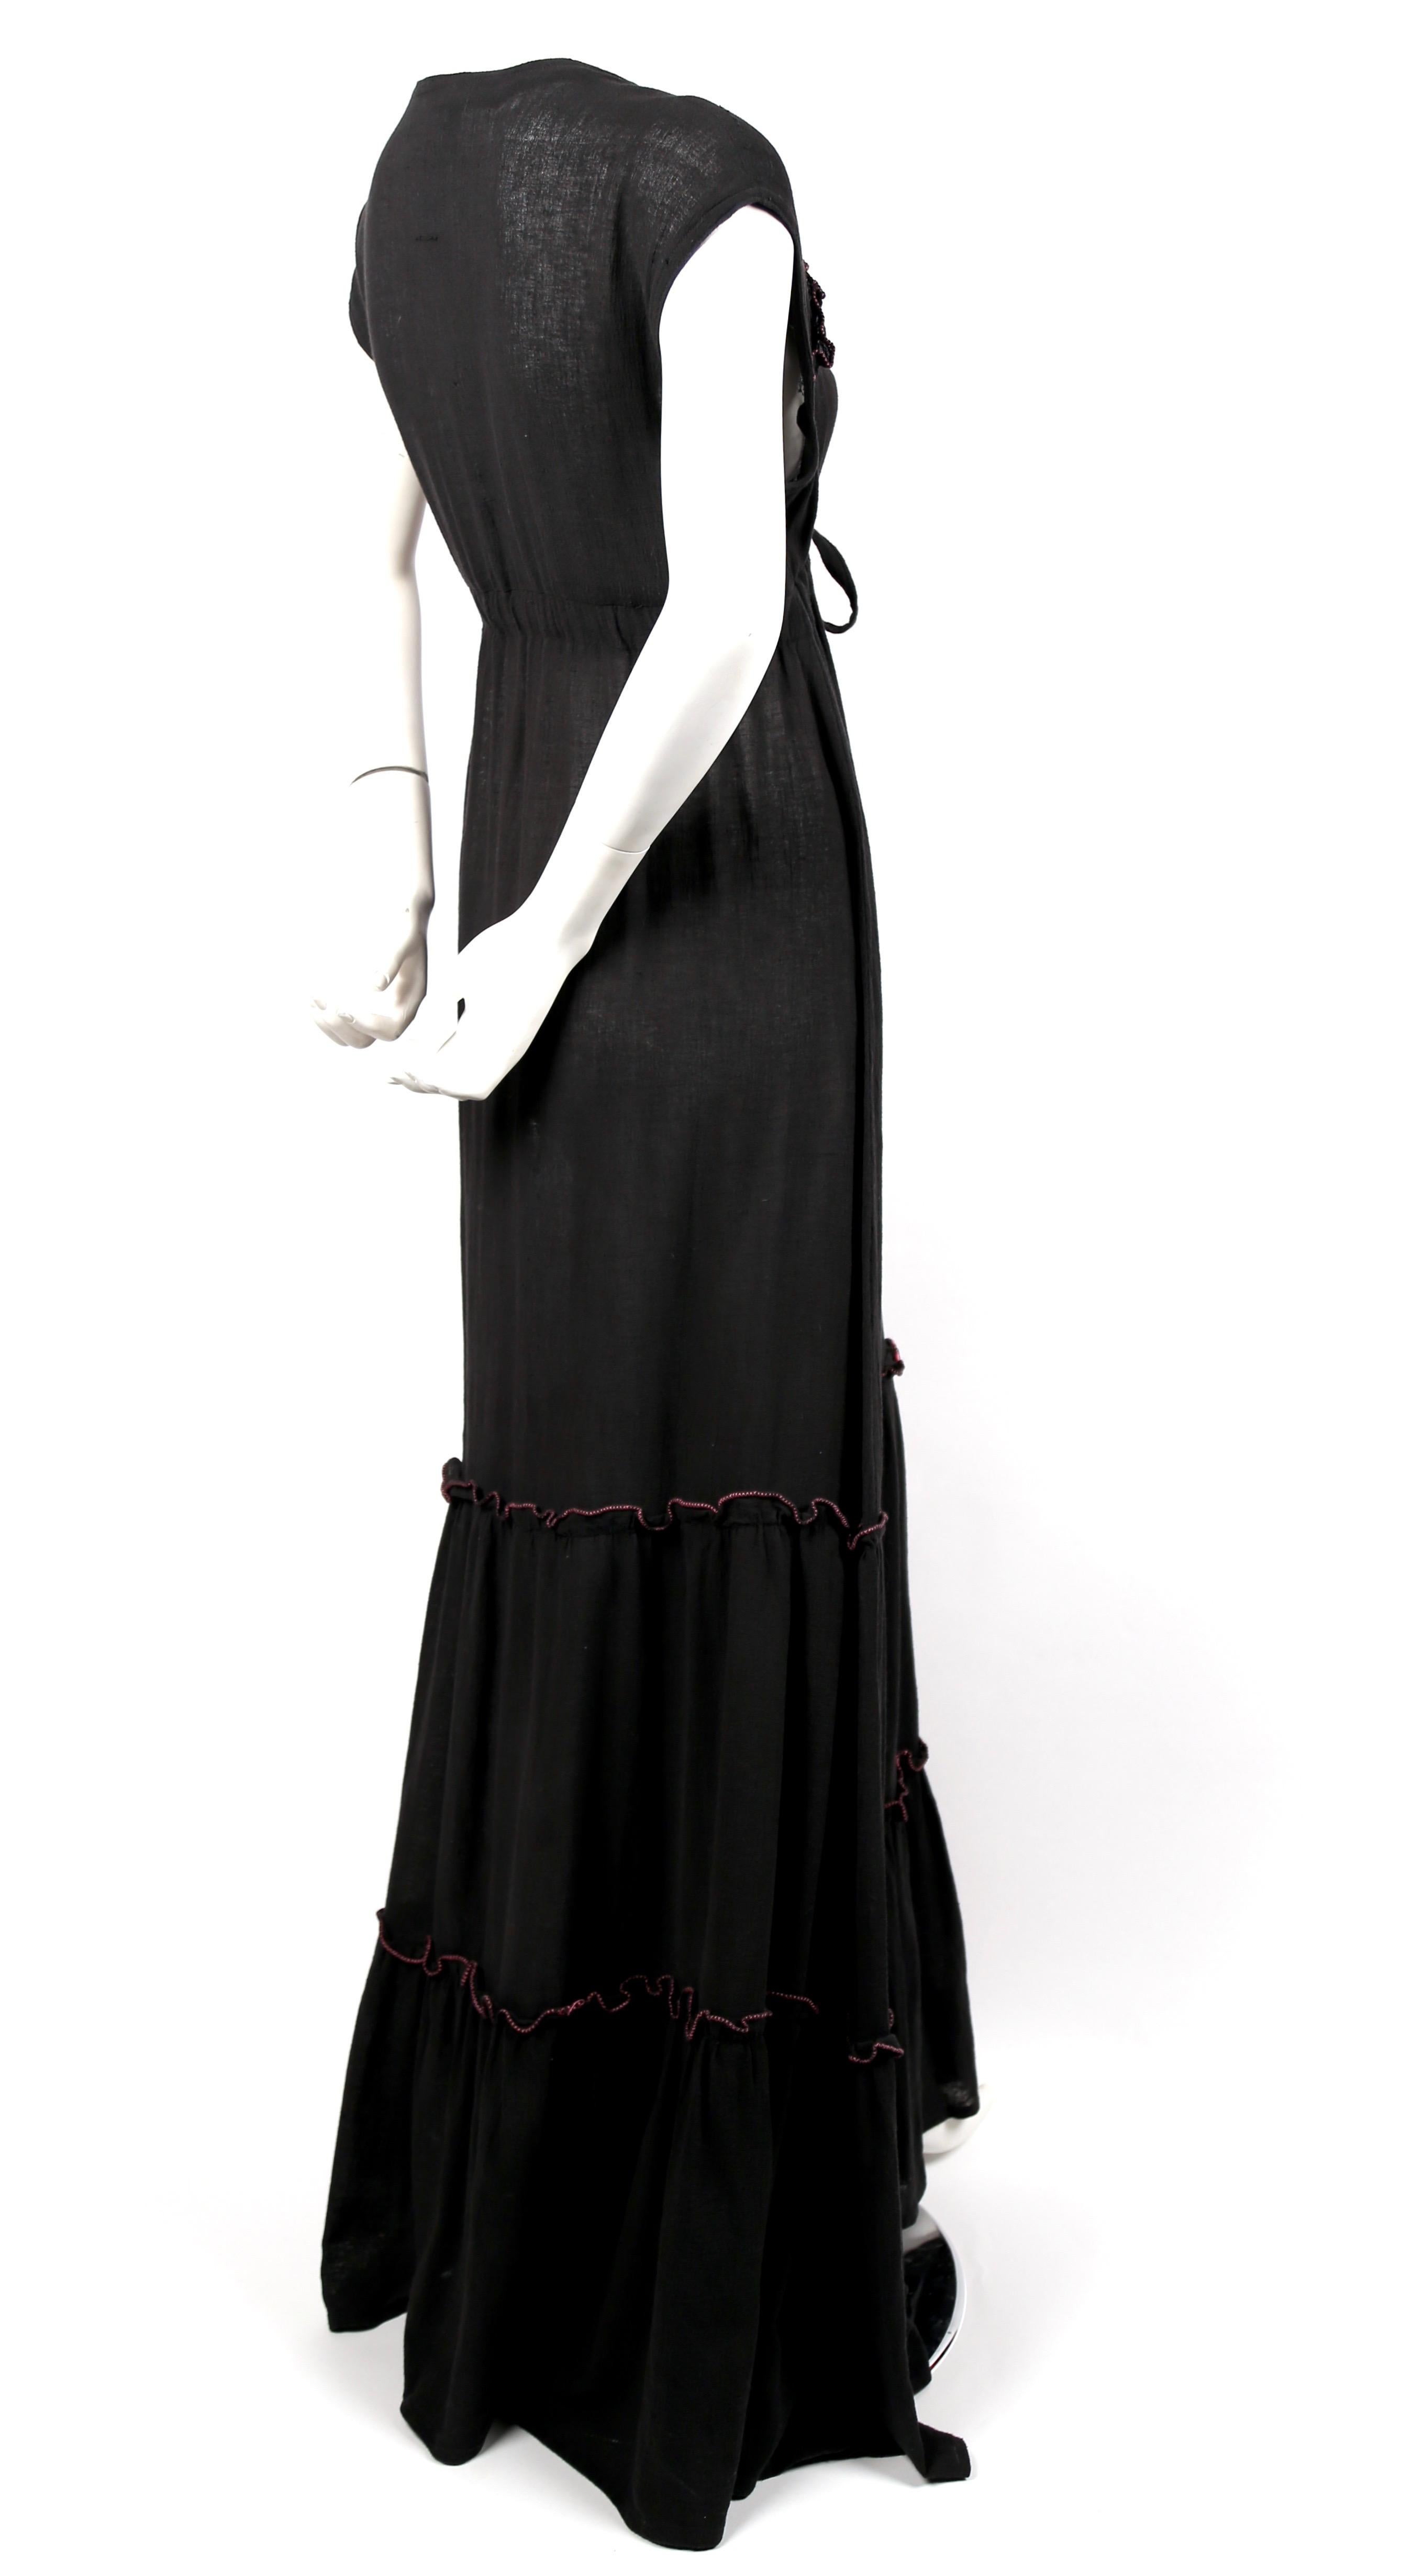 Soft-black, cotton gauze maxi dress with pink stitching made by Radley dating to the 1970's. UK size 12. Dress was photographed on a size 2 mannequin and was not clipped. Adjustable empire waist drawstring closure. Approximate length 62